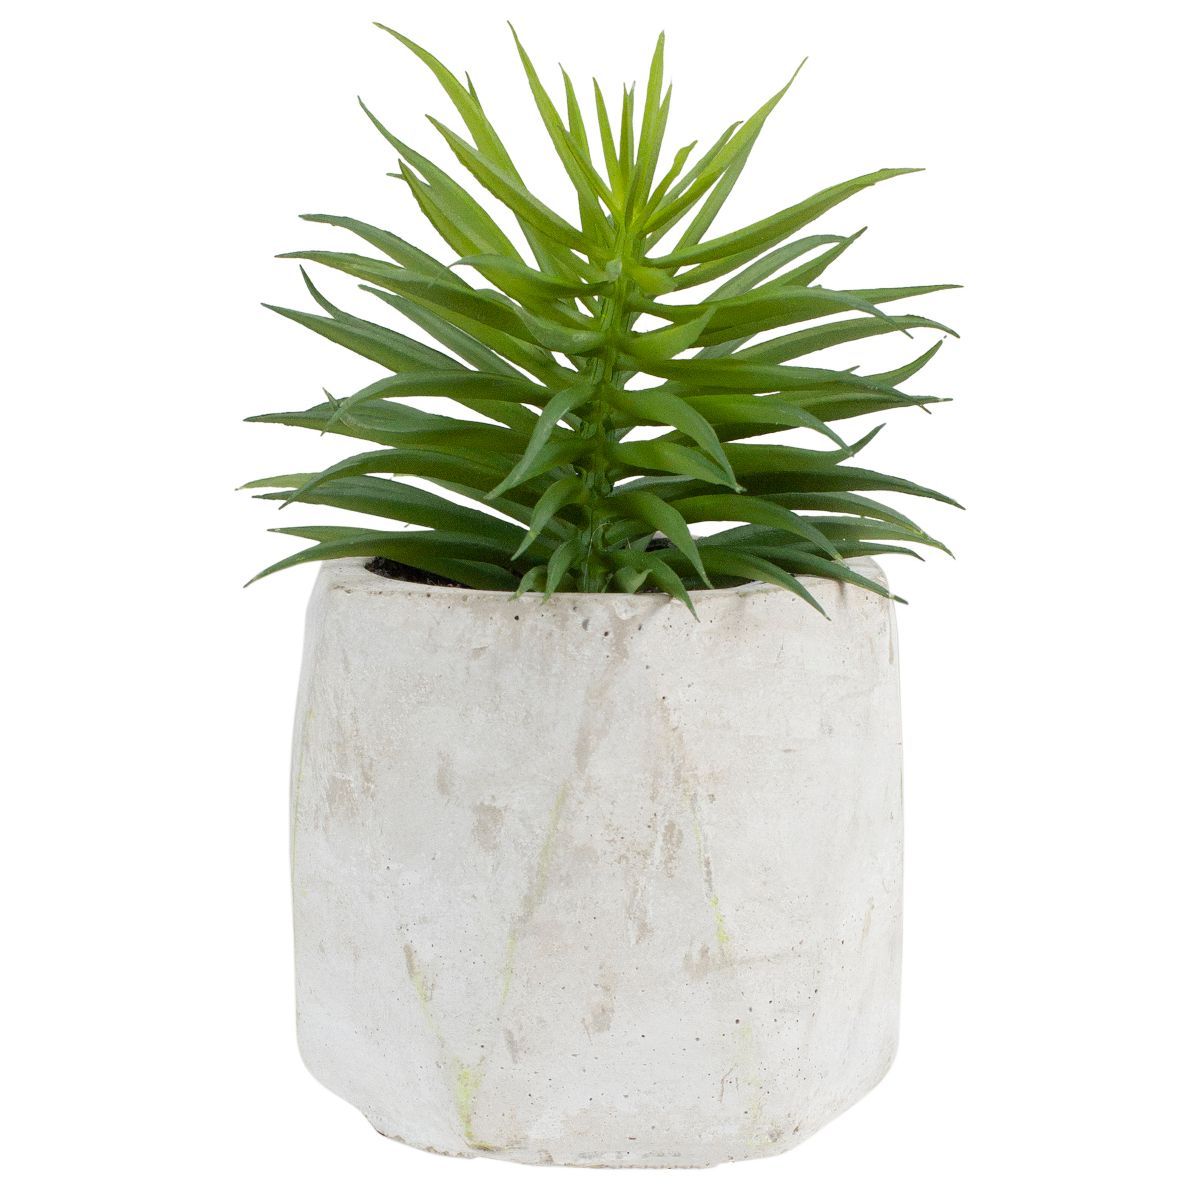 Northlight 5.5" Potted Artificial Succulent in Cement Pot | Target